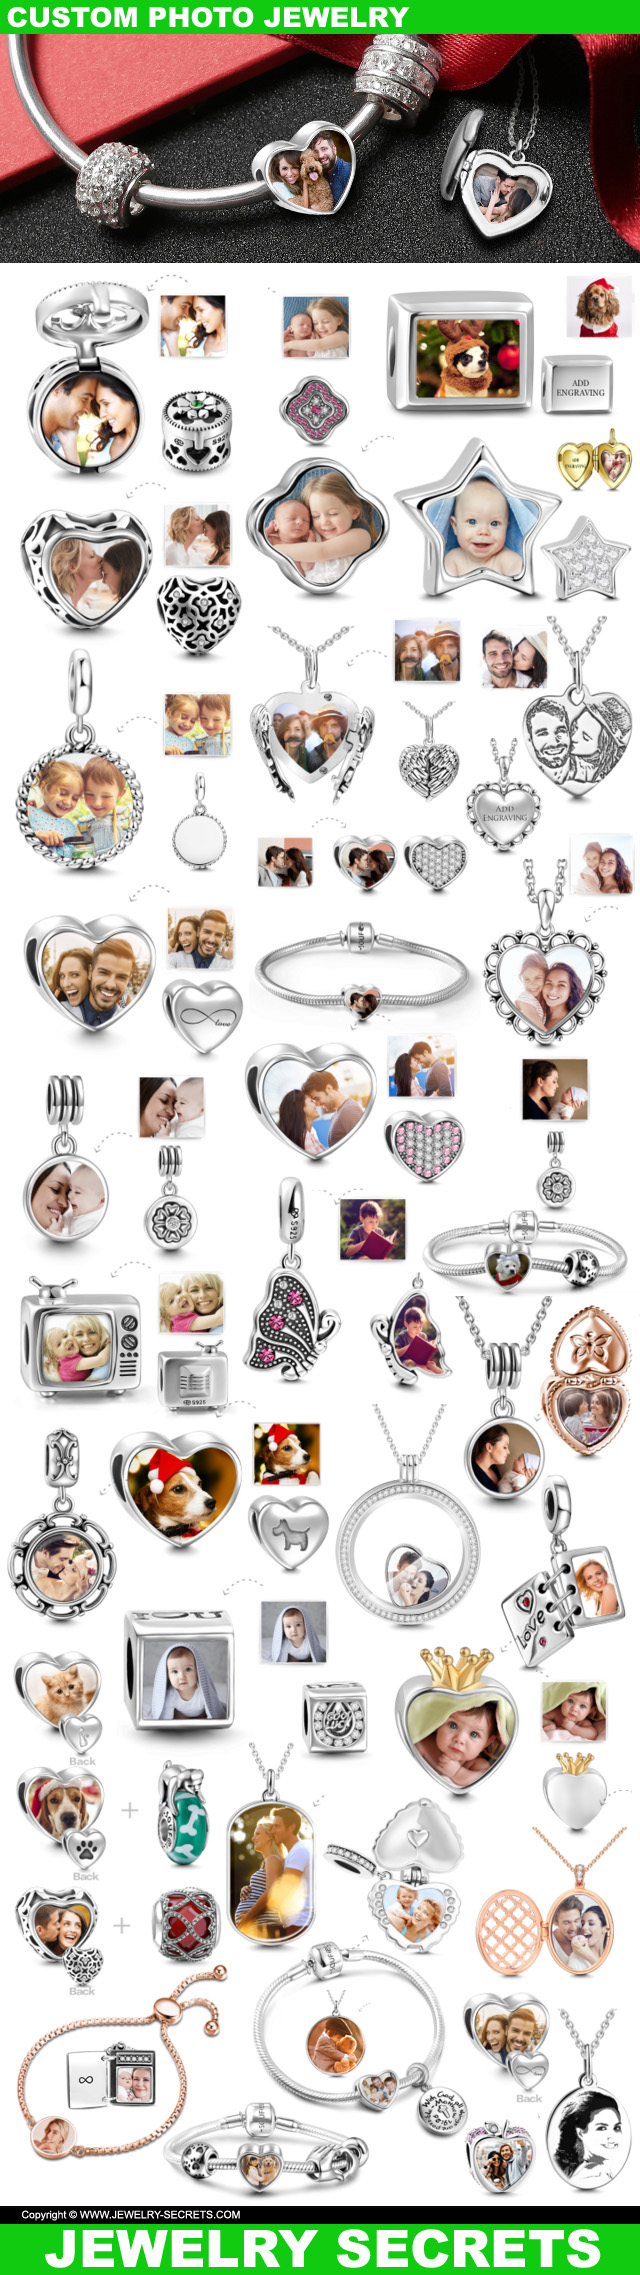 Custom Photo Jewelry You Create From Your Own Photographs